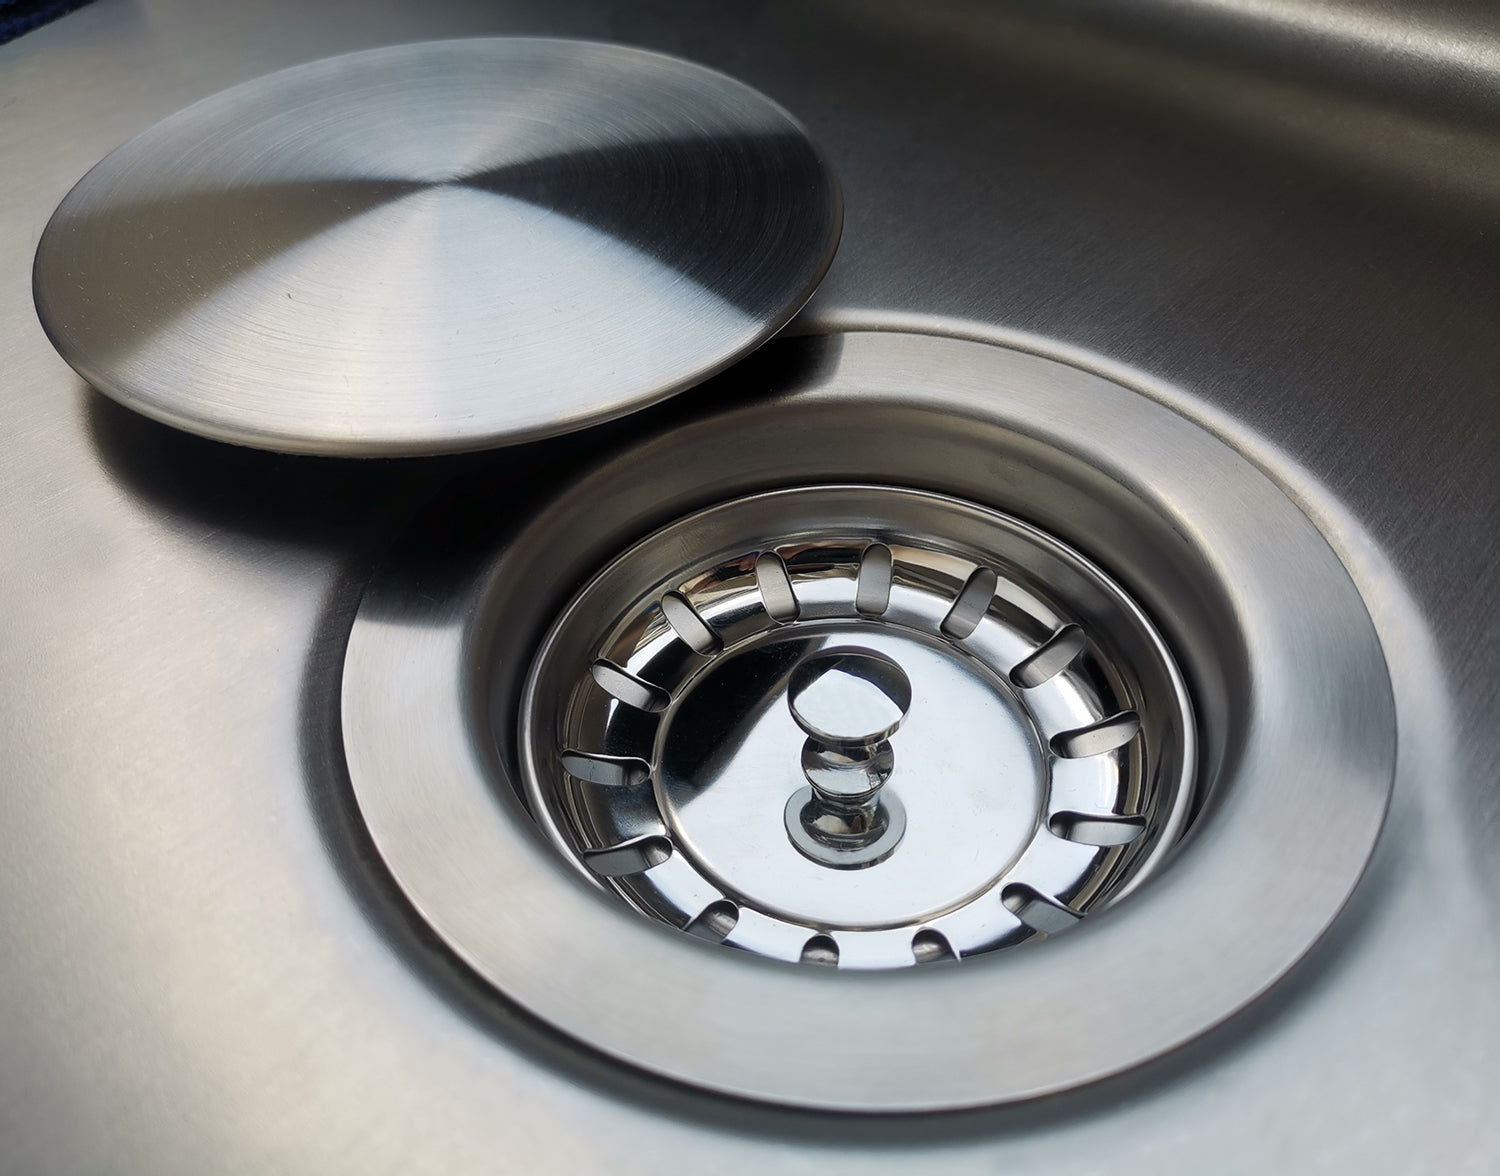 kitchen sink drain cover plate